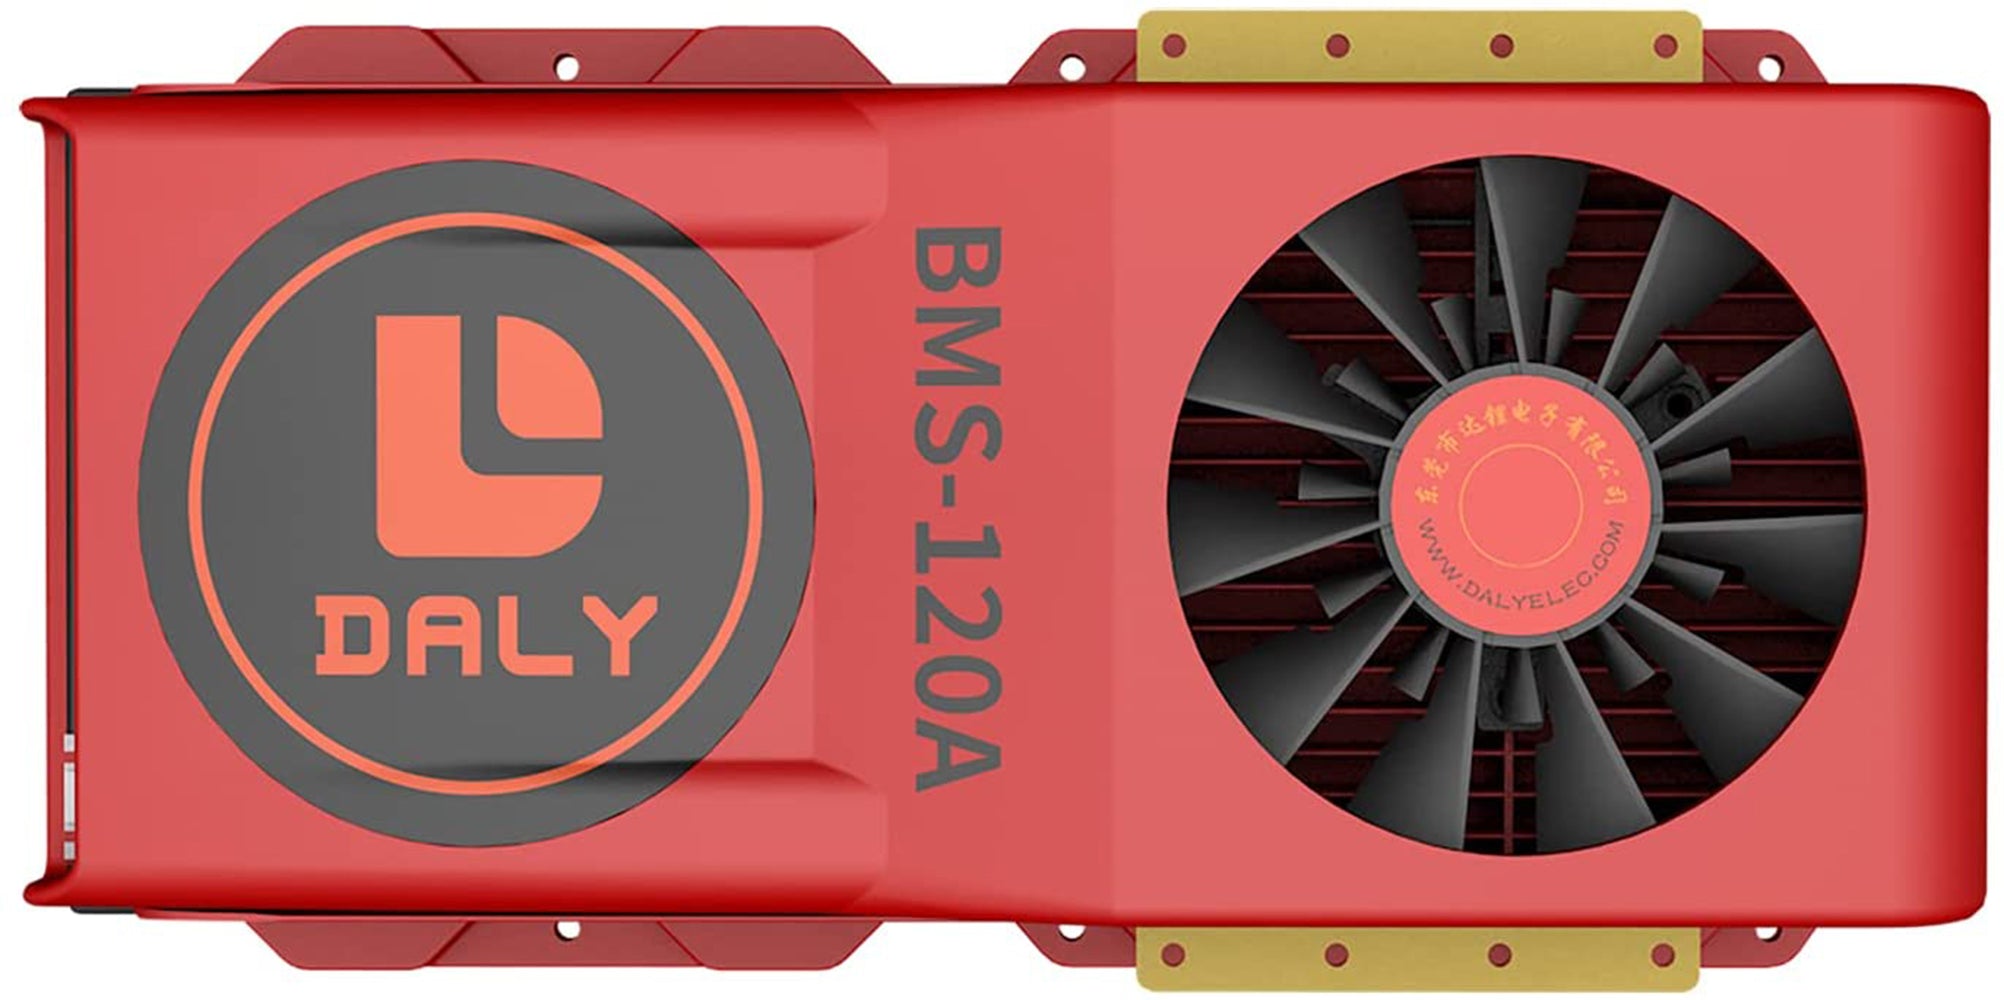 Daly smart bms Lion 3S 12V 120A FAN  bluetooth BMS  boardithium battery protection Board  50120209